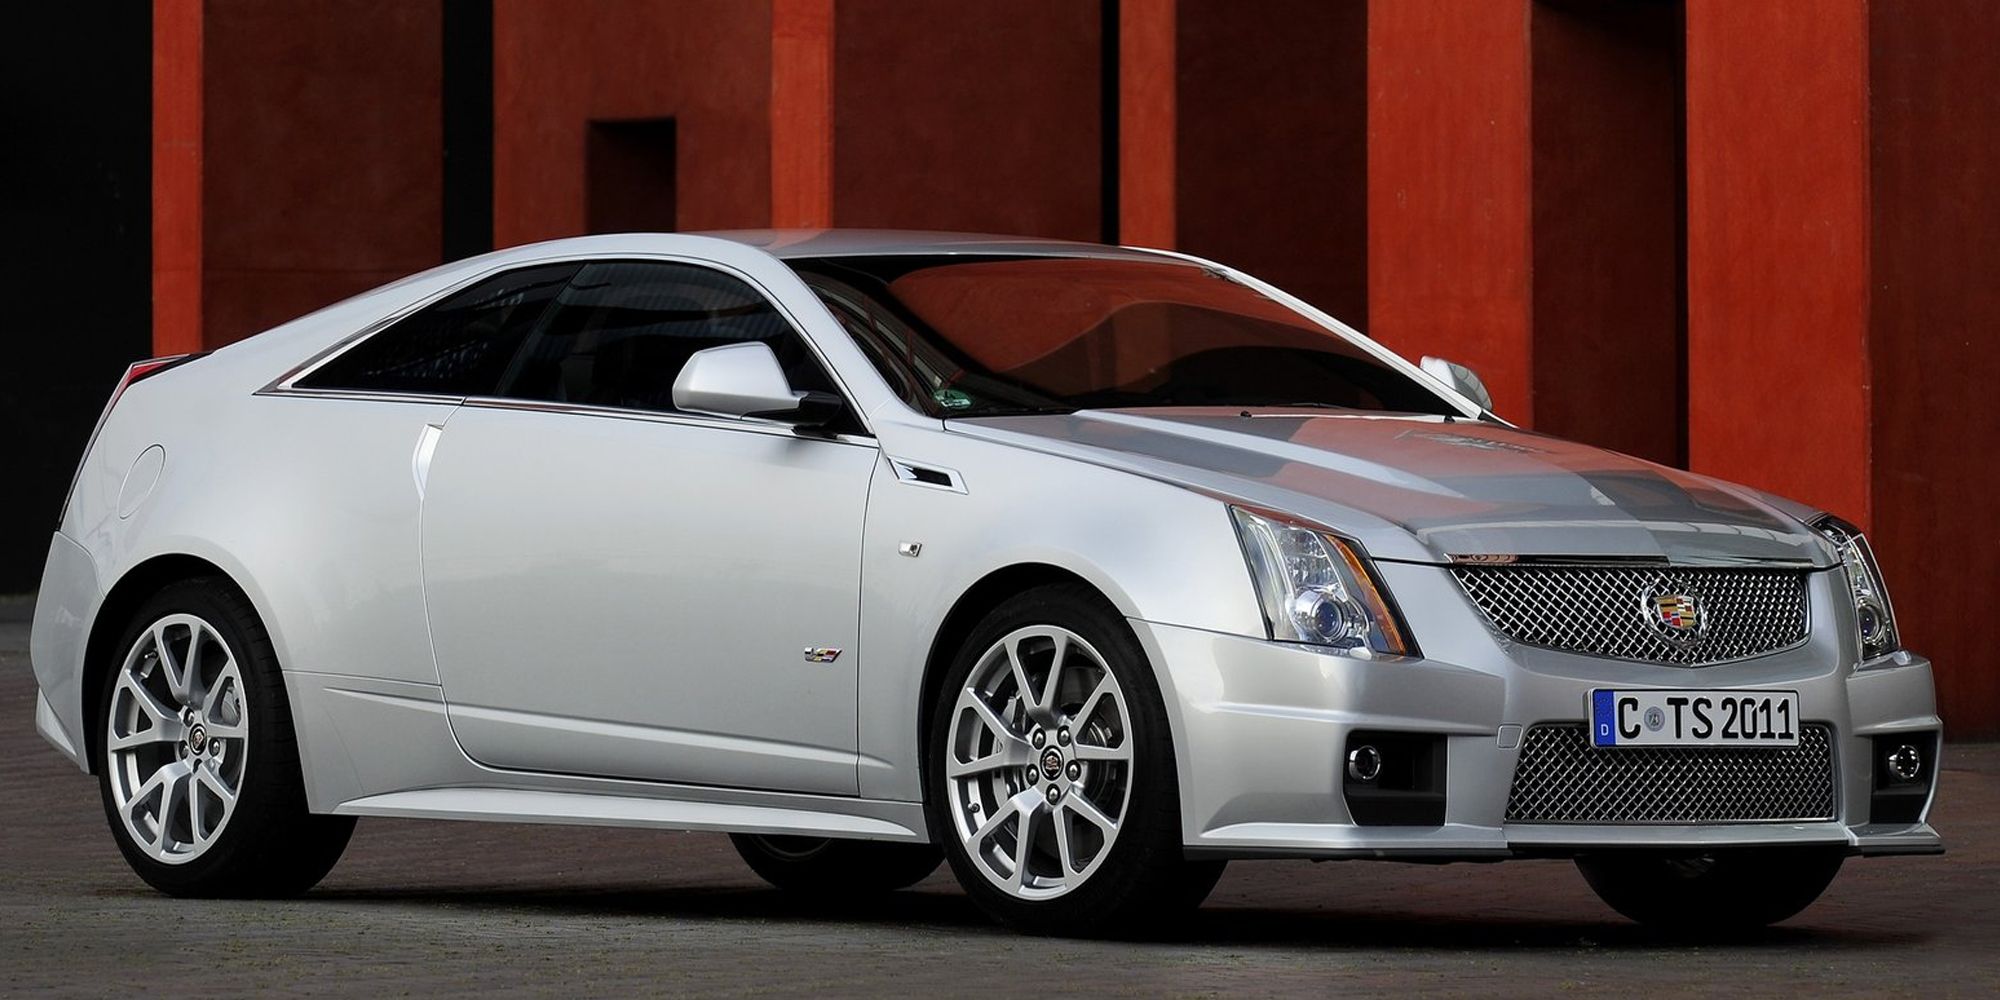 Front 3/4 view of a silver CTS-V coupe